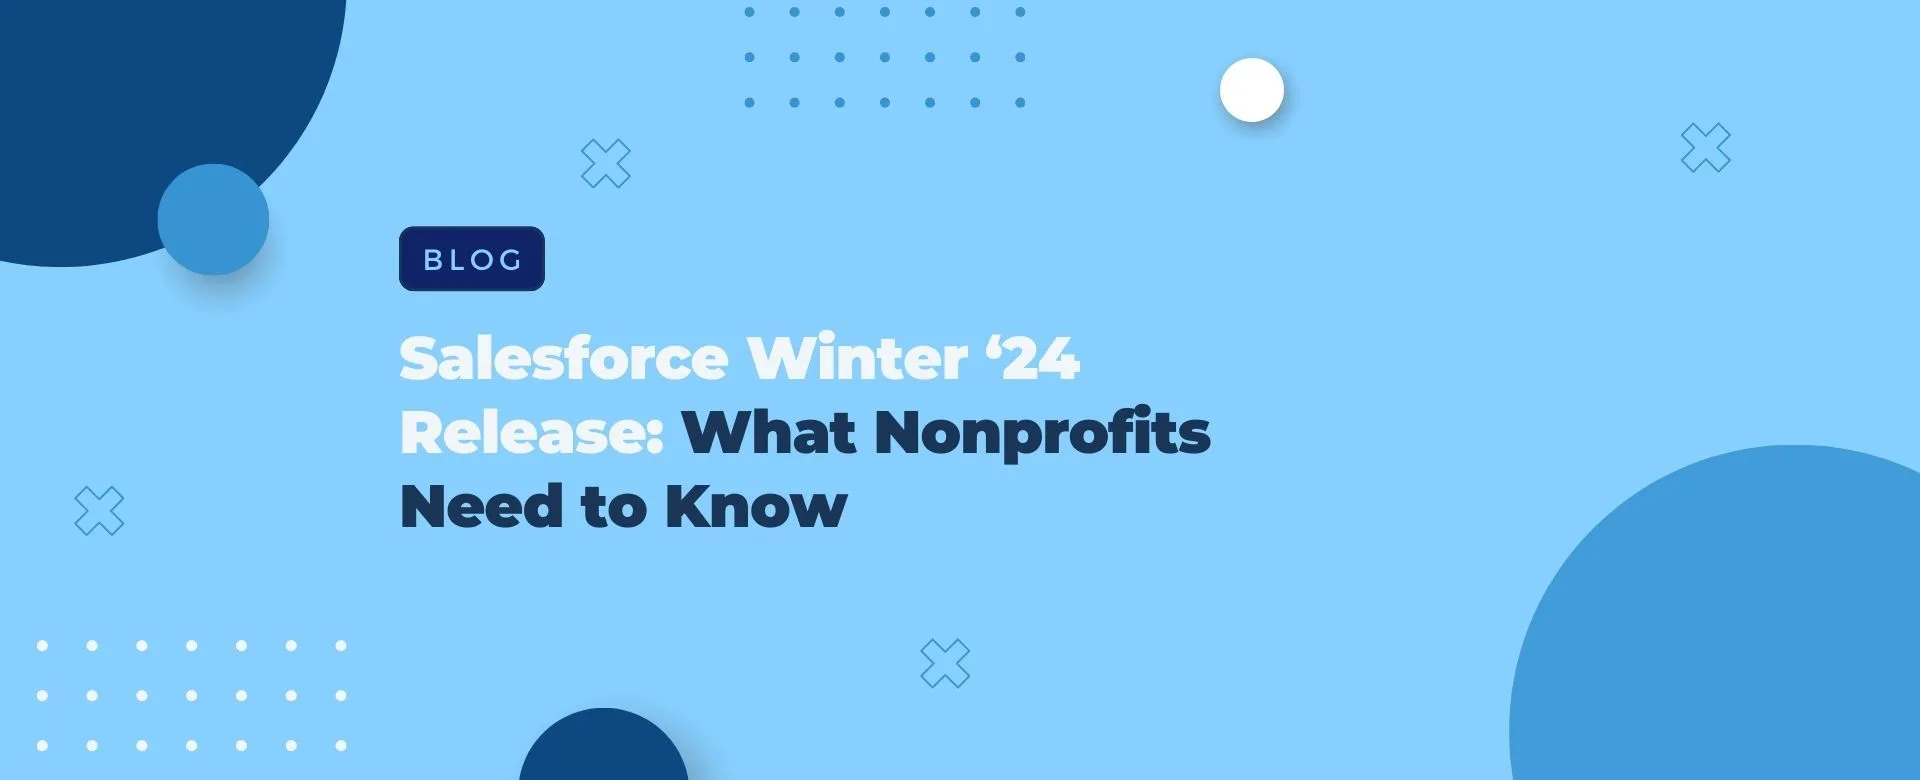 Salesforce Winter ‘24 Release: What Nonprofits Need to Know